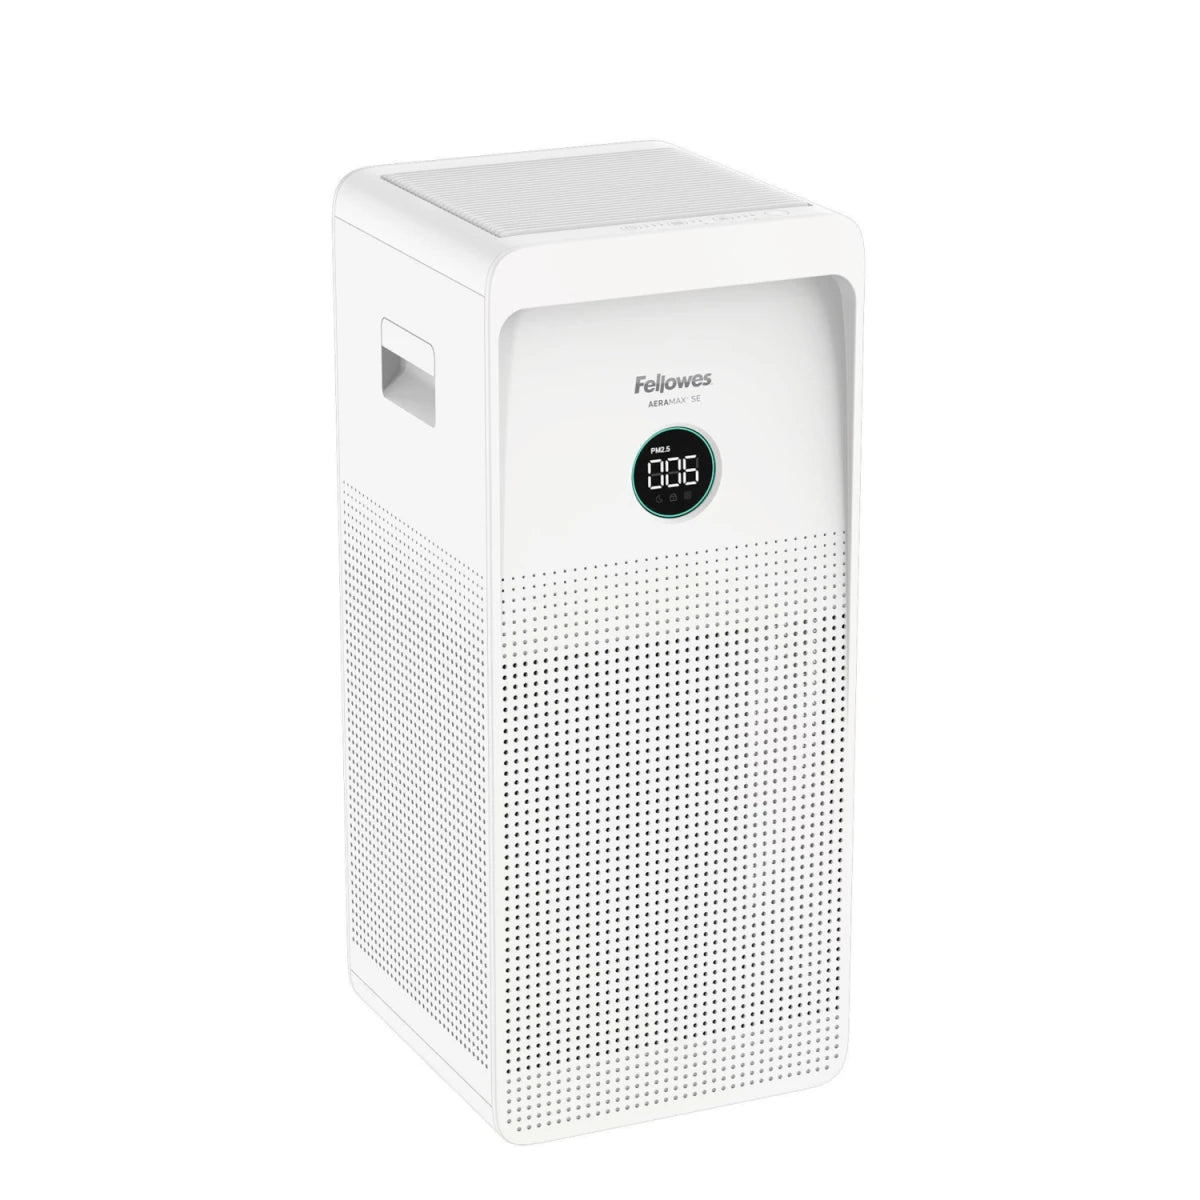 Fellowes AeraMax SE 3-Speed Large Room Air Purifier with True HEPA Air Filter - White